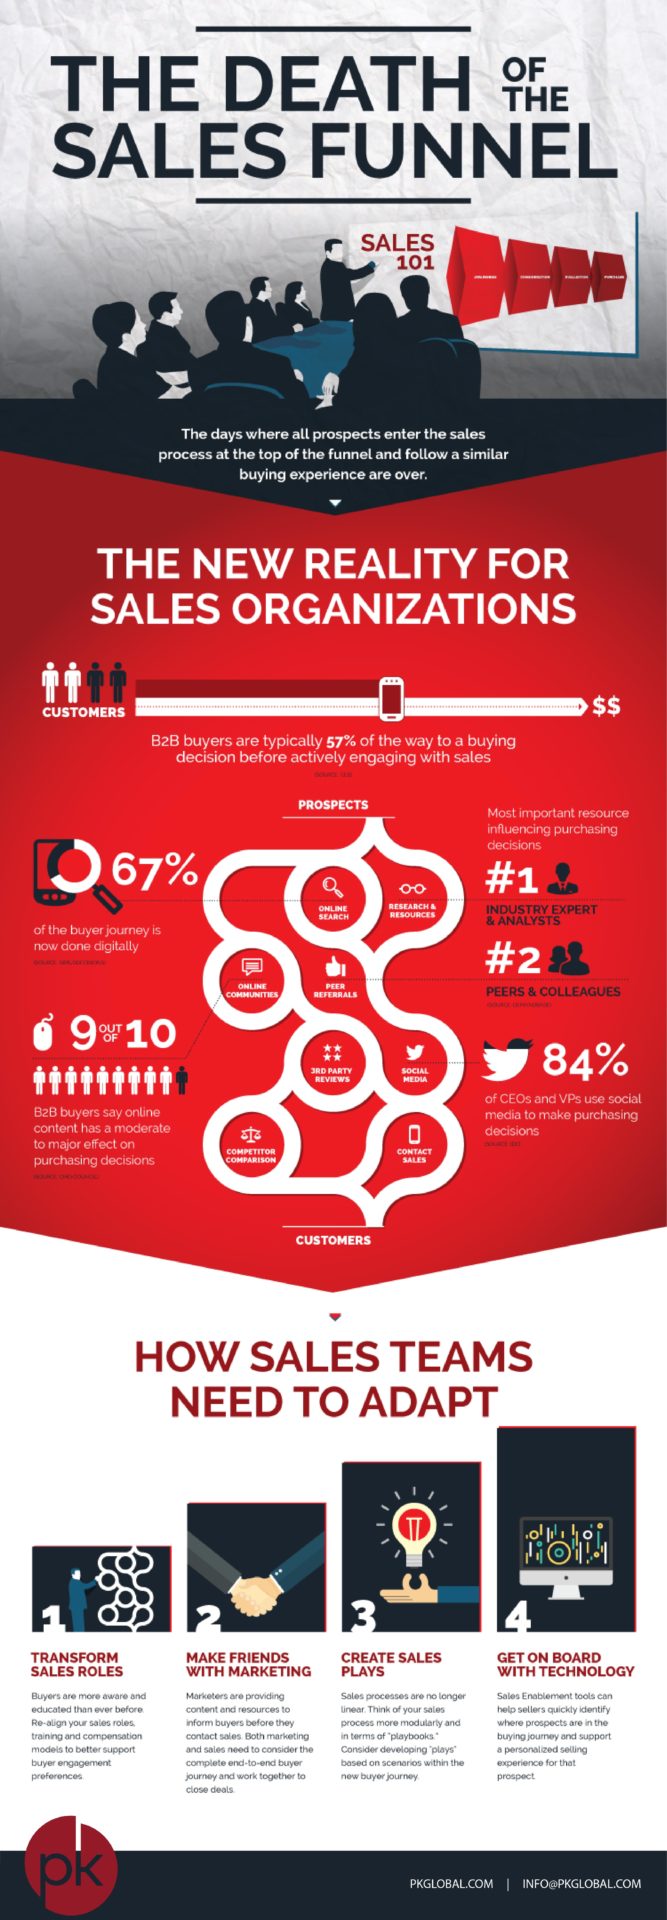 The Death of the Sales Funnel [Infographic]